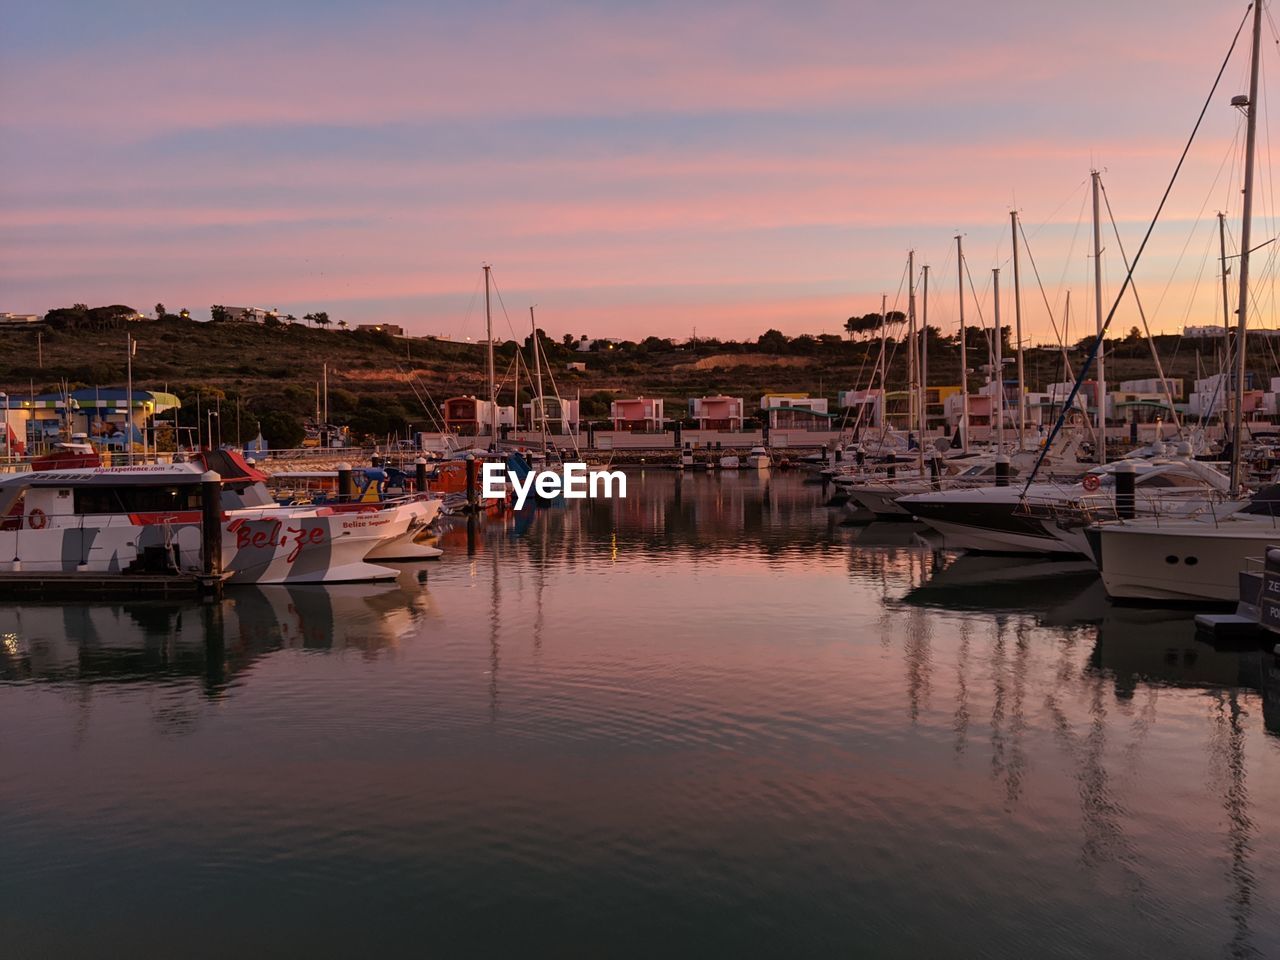 BOATS IN HARBOR AT SUNSET